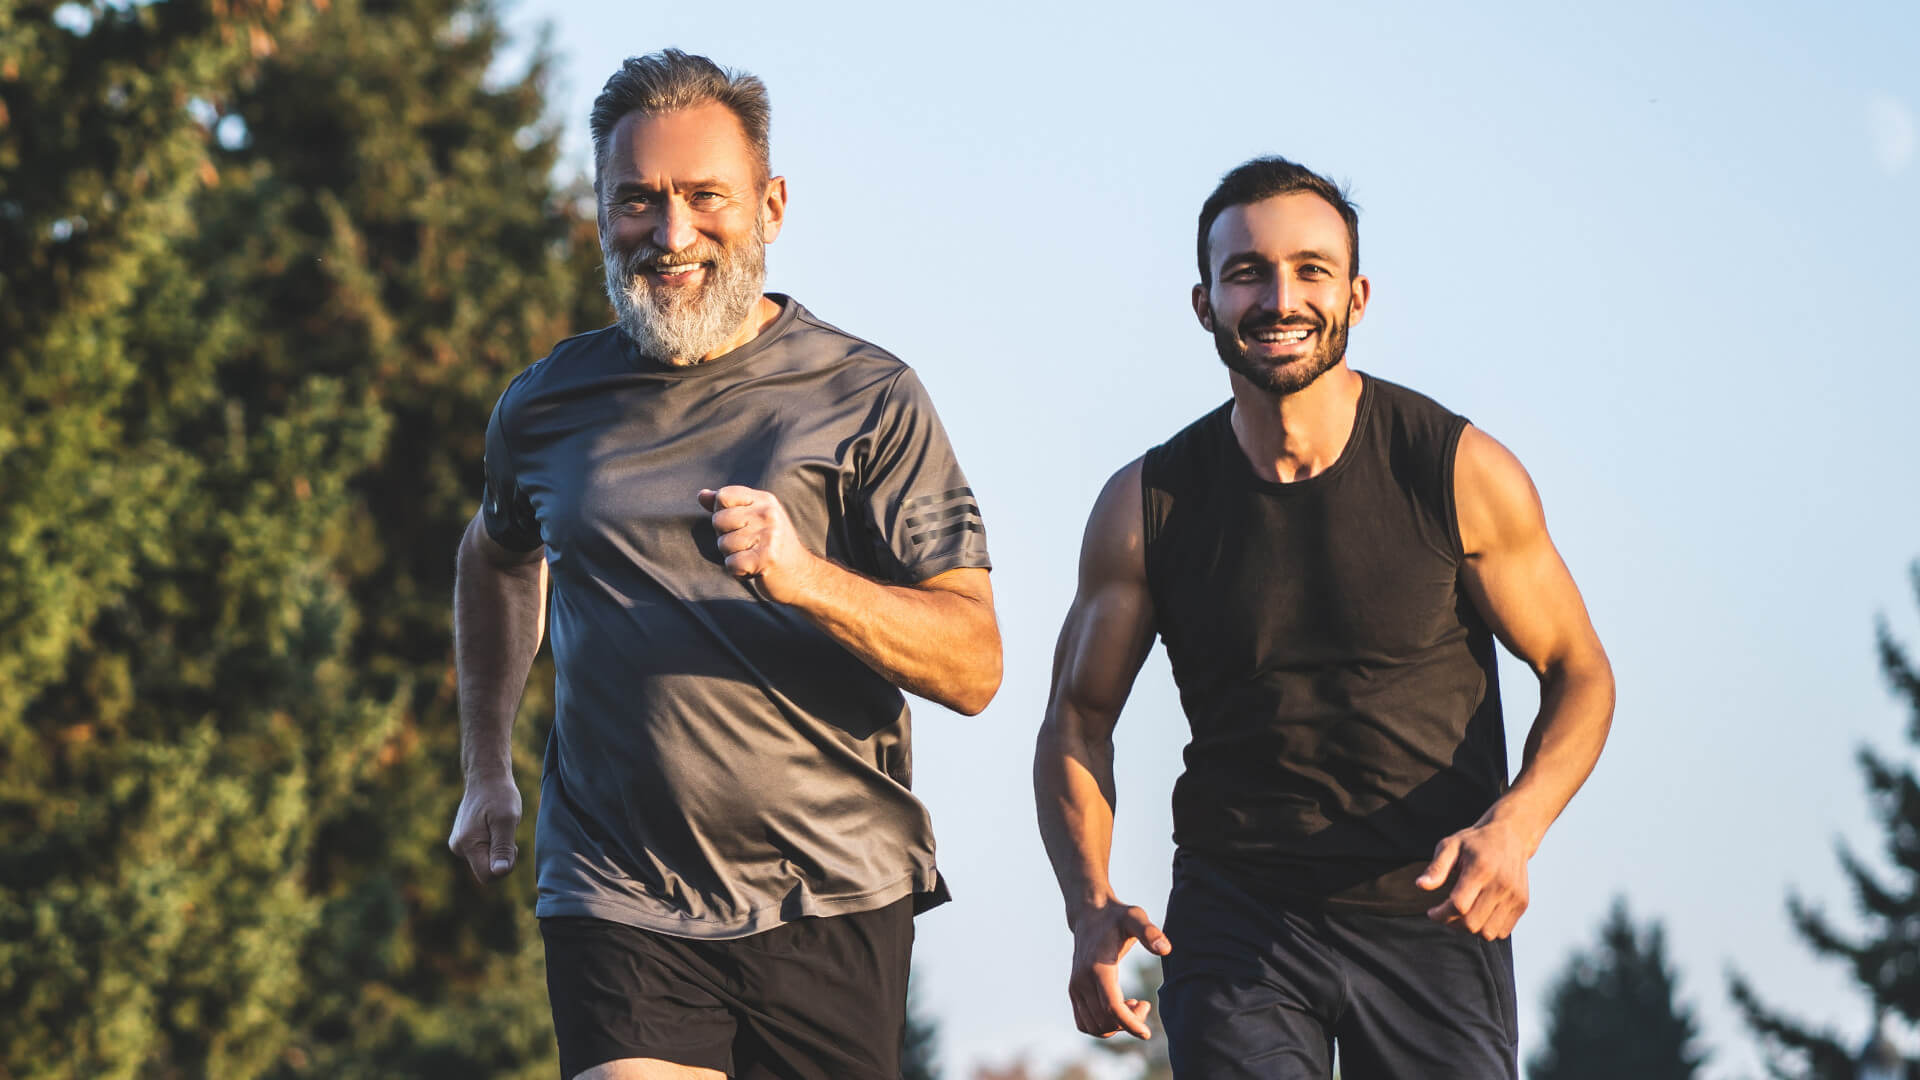 men running to boost energy levels naturally